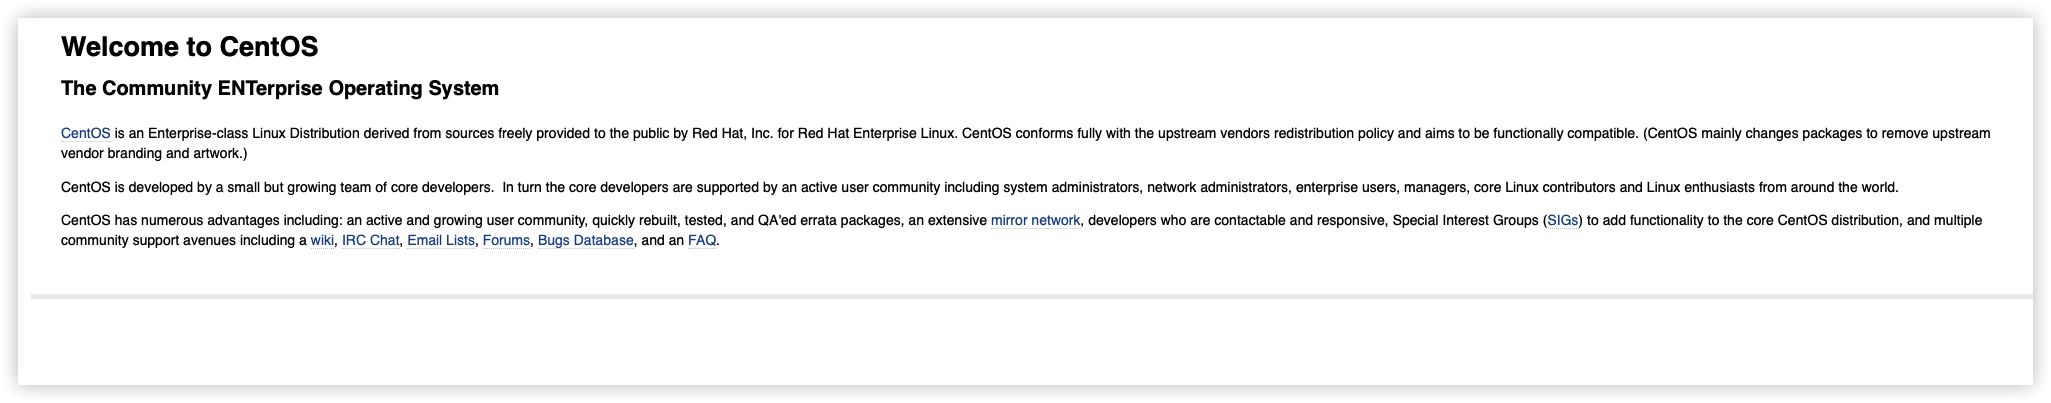 Welcome to CentOS